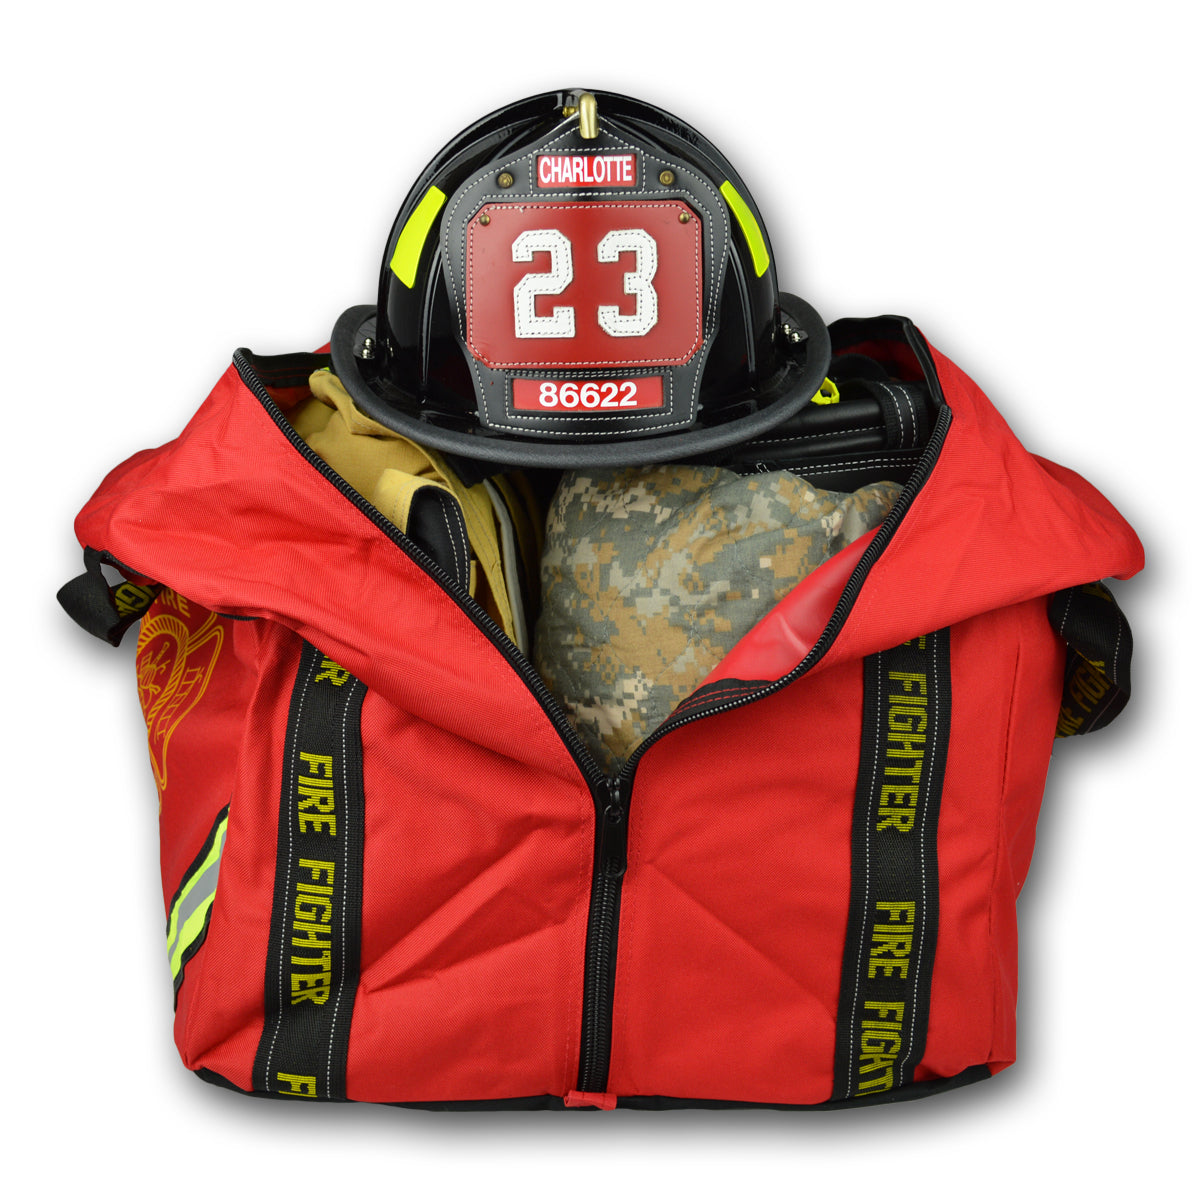 Lightning X Compact Boot Style Firefighter Turnout Gear Bag (LXFB70) | The Fire Center | Fuego Fire Center | Store | FIREFIGHTER GEAR | FREE SHIPPING | Sometimes simplicity is the best solution. The FB70 is a workhorse turnout bag without all the unnecessary bells and whistles. Simply put – it gets the job done. The FB70 is a center “clam shell” opening step-in style gear bag that stores turnout gear and boots in a ready-to-go state. 